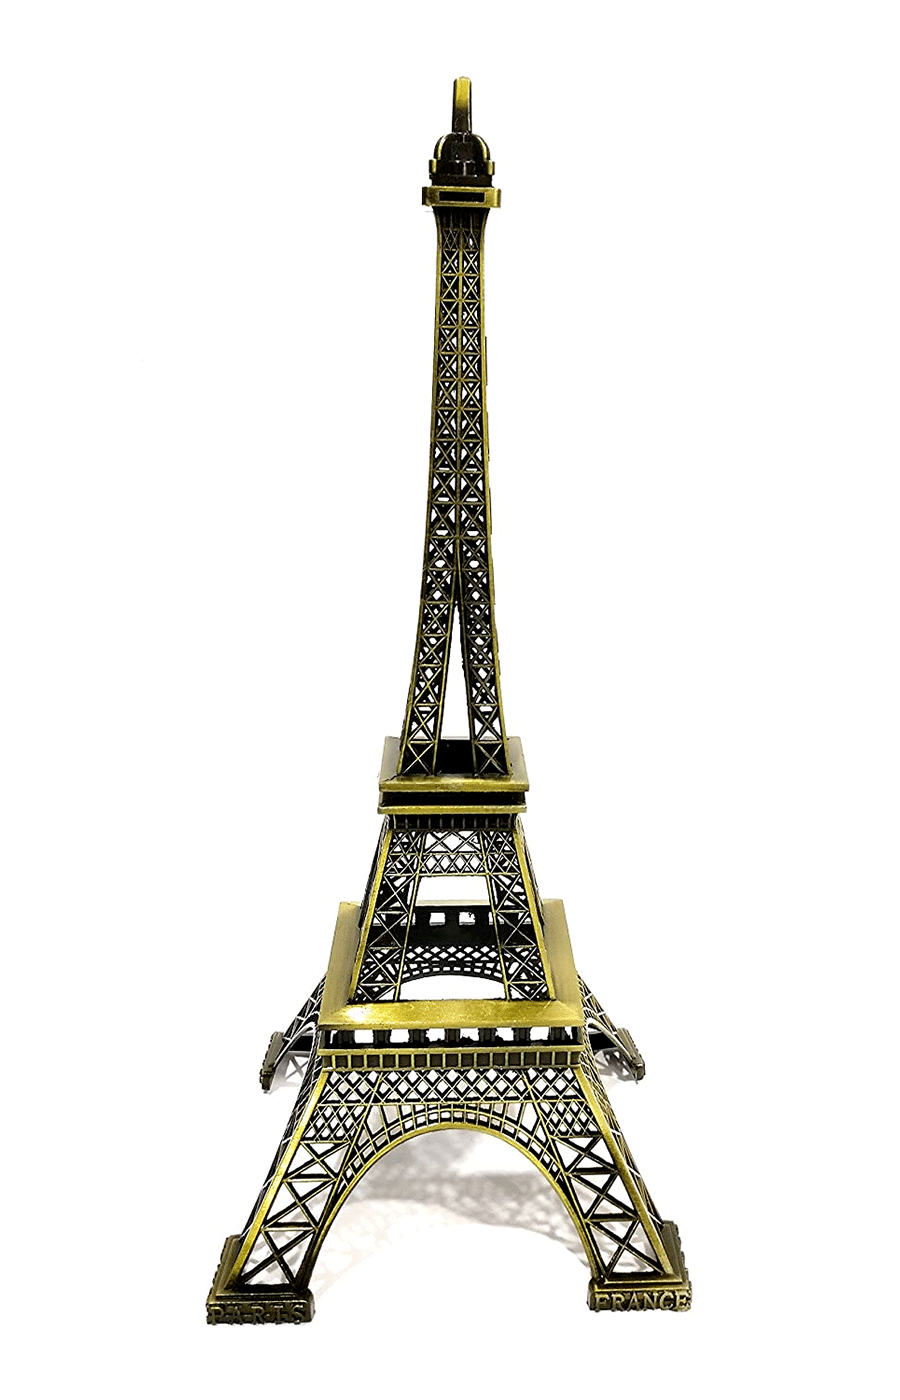 FunkyTradition 33 CM Tall Eiffel Tower Statue Metal Showpiece | Birthday Anniversary Gift and Home Office Decor 13" Tall